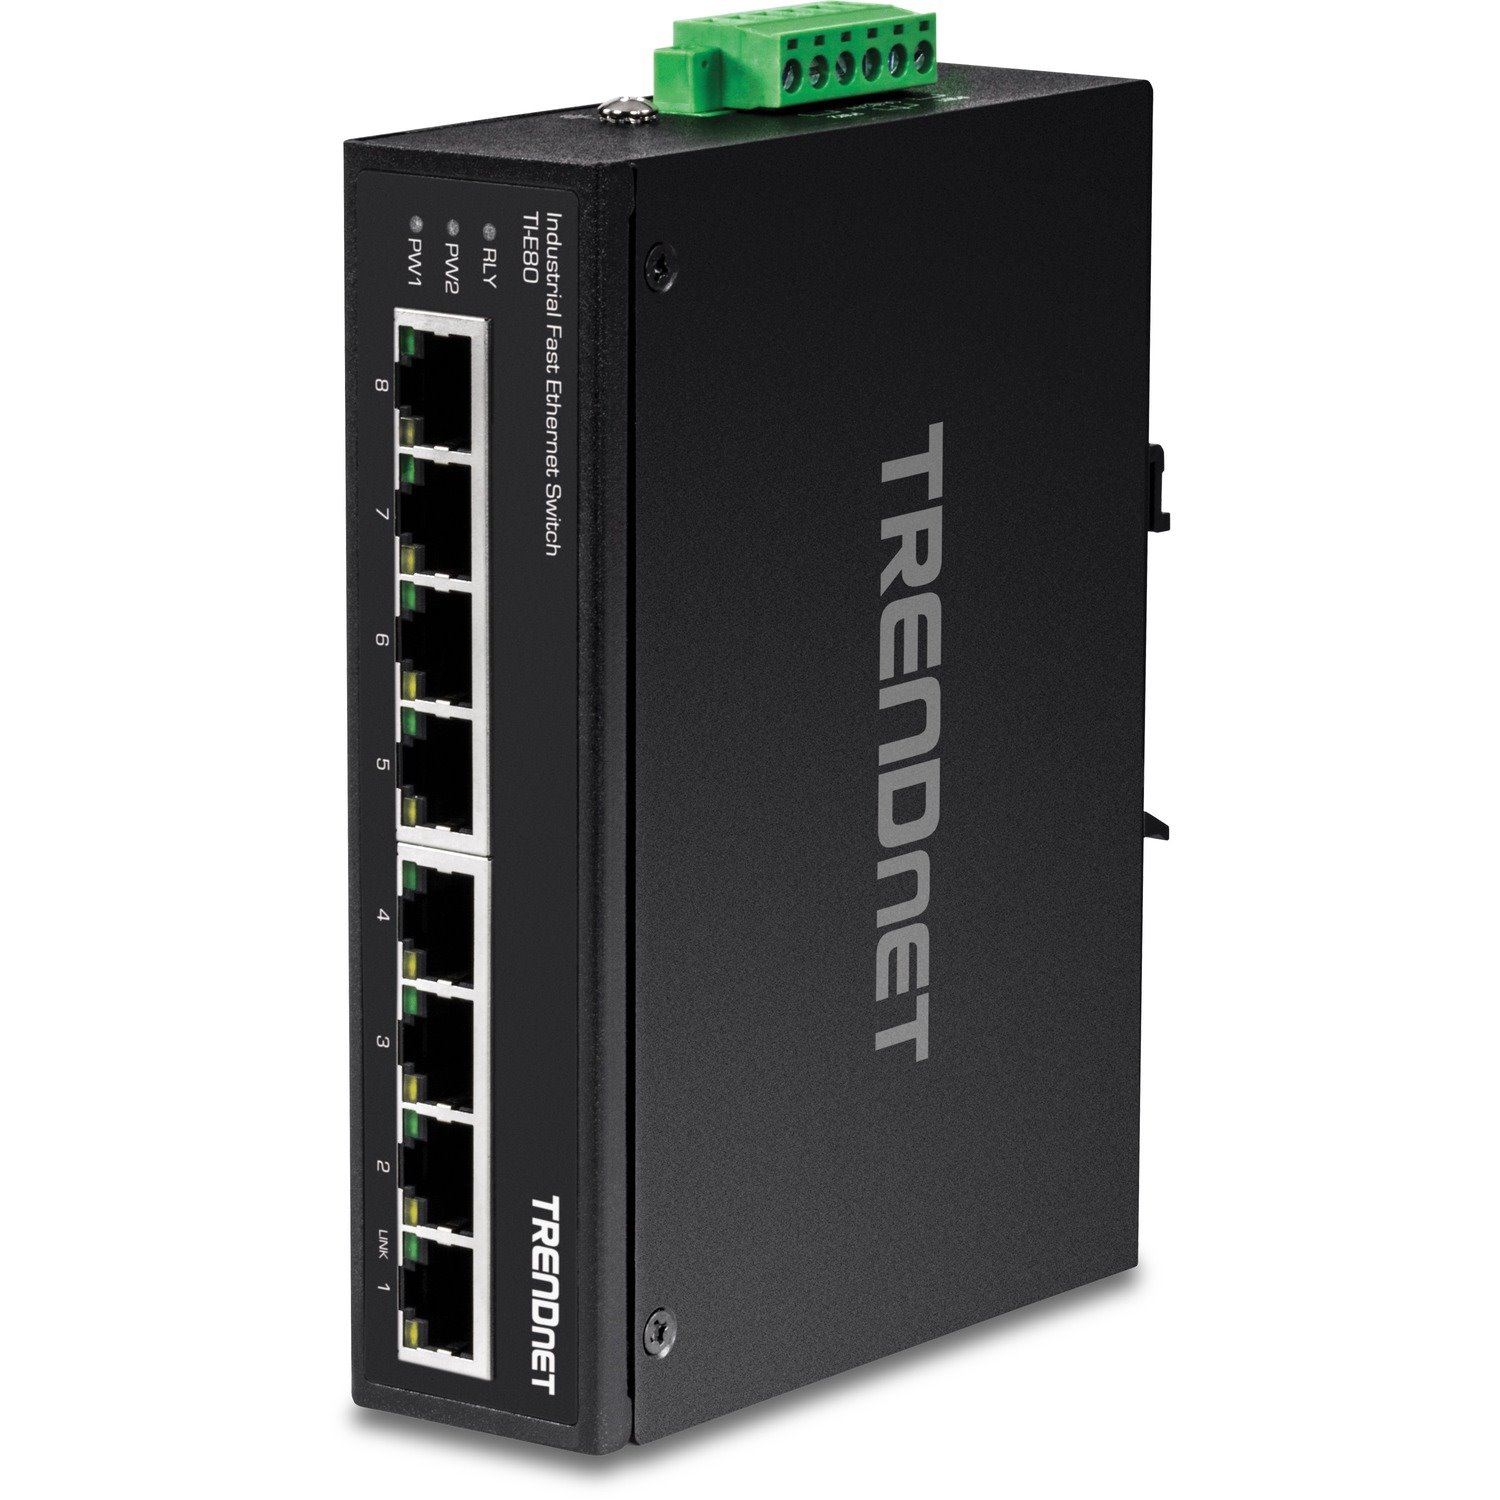 TRENDnet 8-Port Industrial Unmanaged Fast Ethernet DIN-Rail Switch; TI-E80 8 x Fast Ethernet Ports; 1.6Gbps Switching Capacity;8 Port Network Fast Ethernet Switch;IP30 Metal Switch;Lifetime Protection